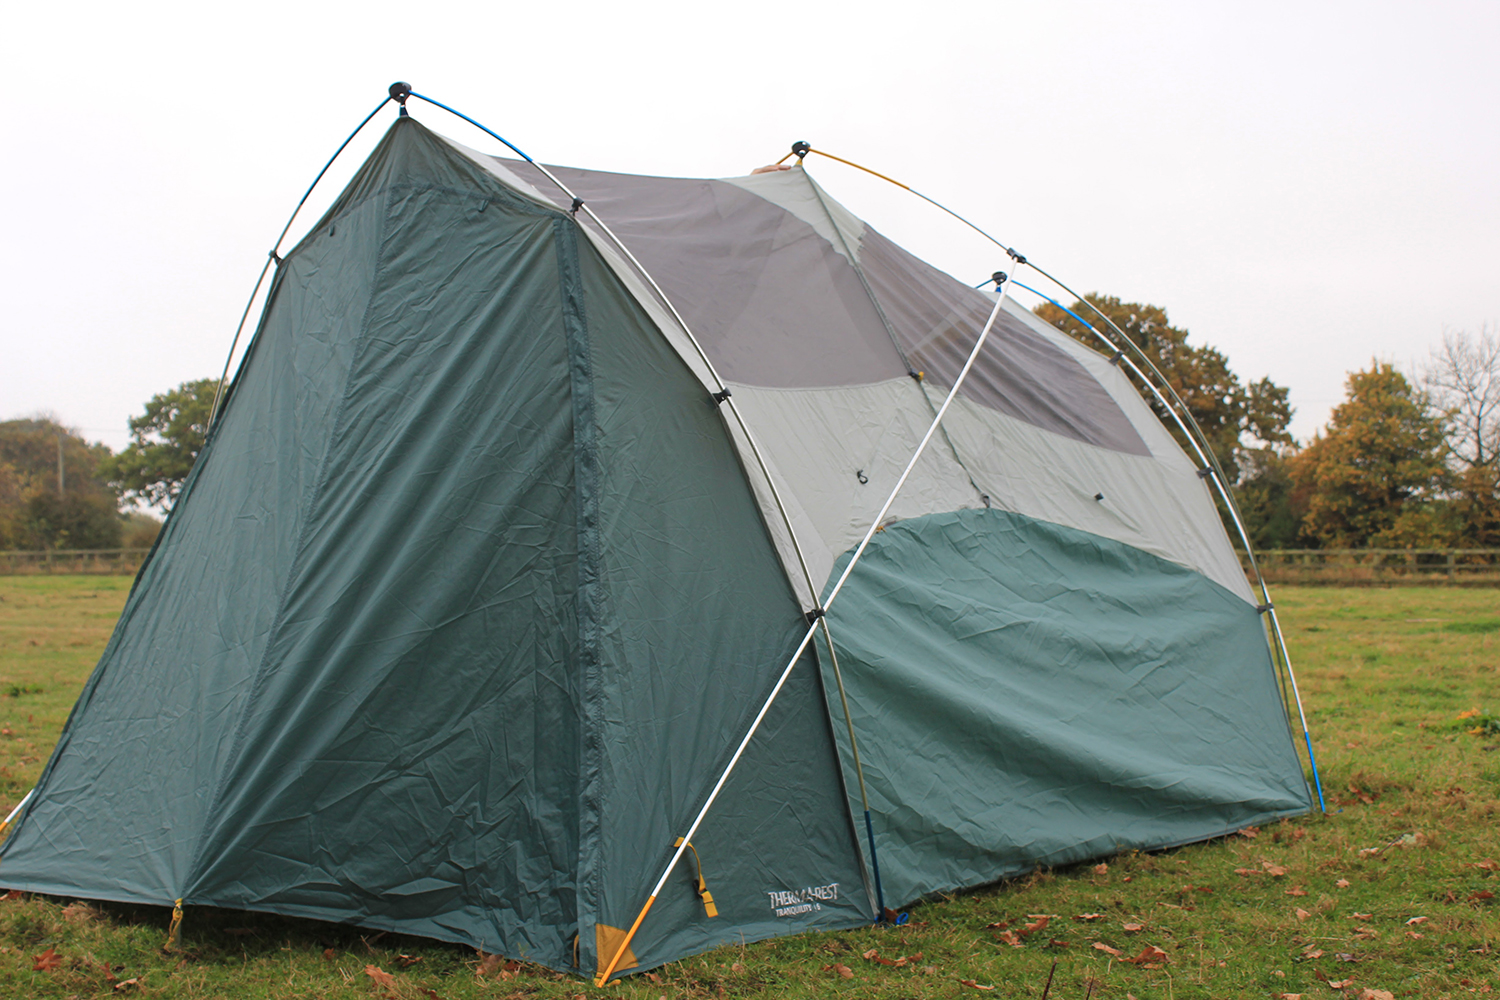 Pitching the Thermarest tent